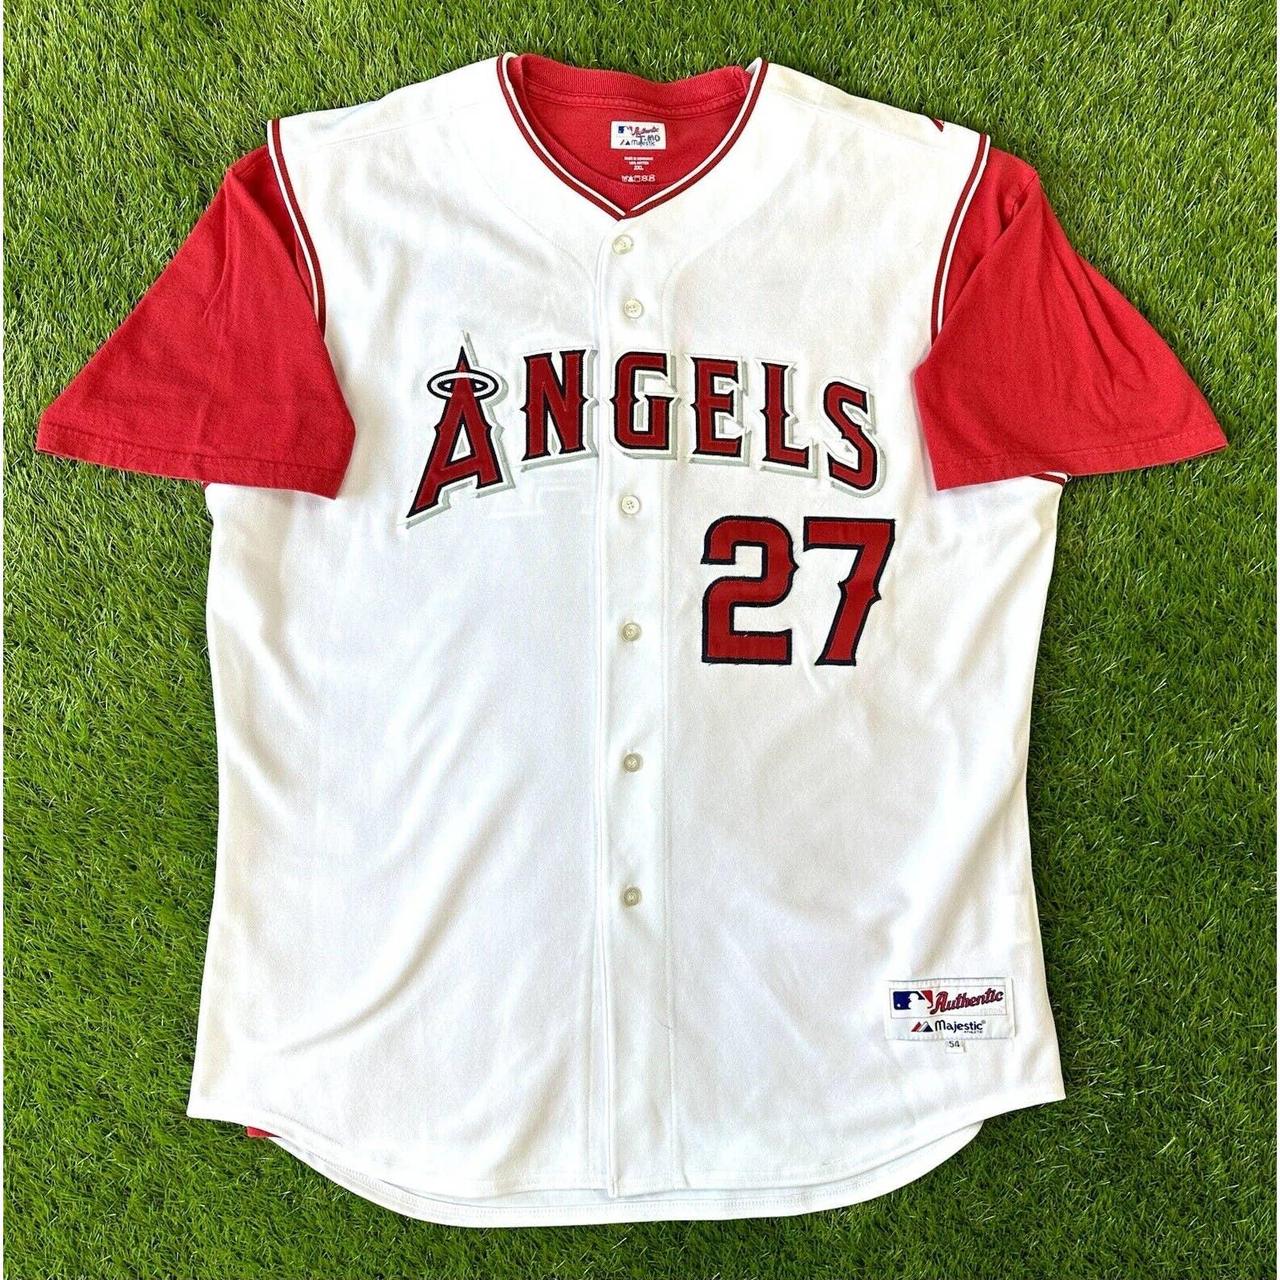 Authentic Anaheim Angels Mens Size 54 On Field Red Baseball Jersey by  Majestic